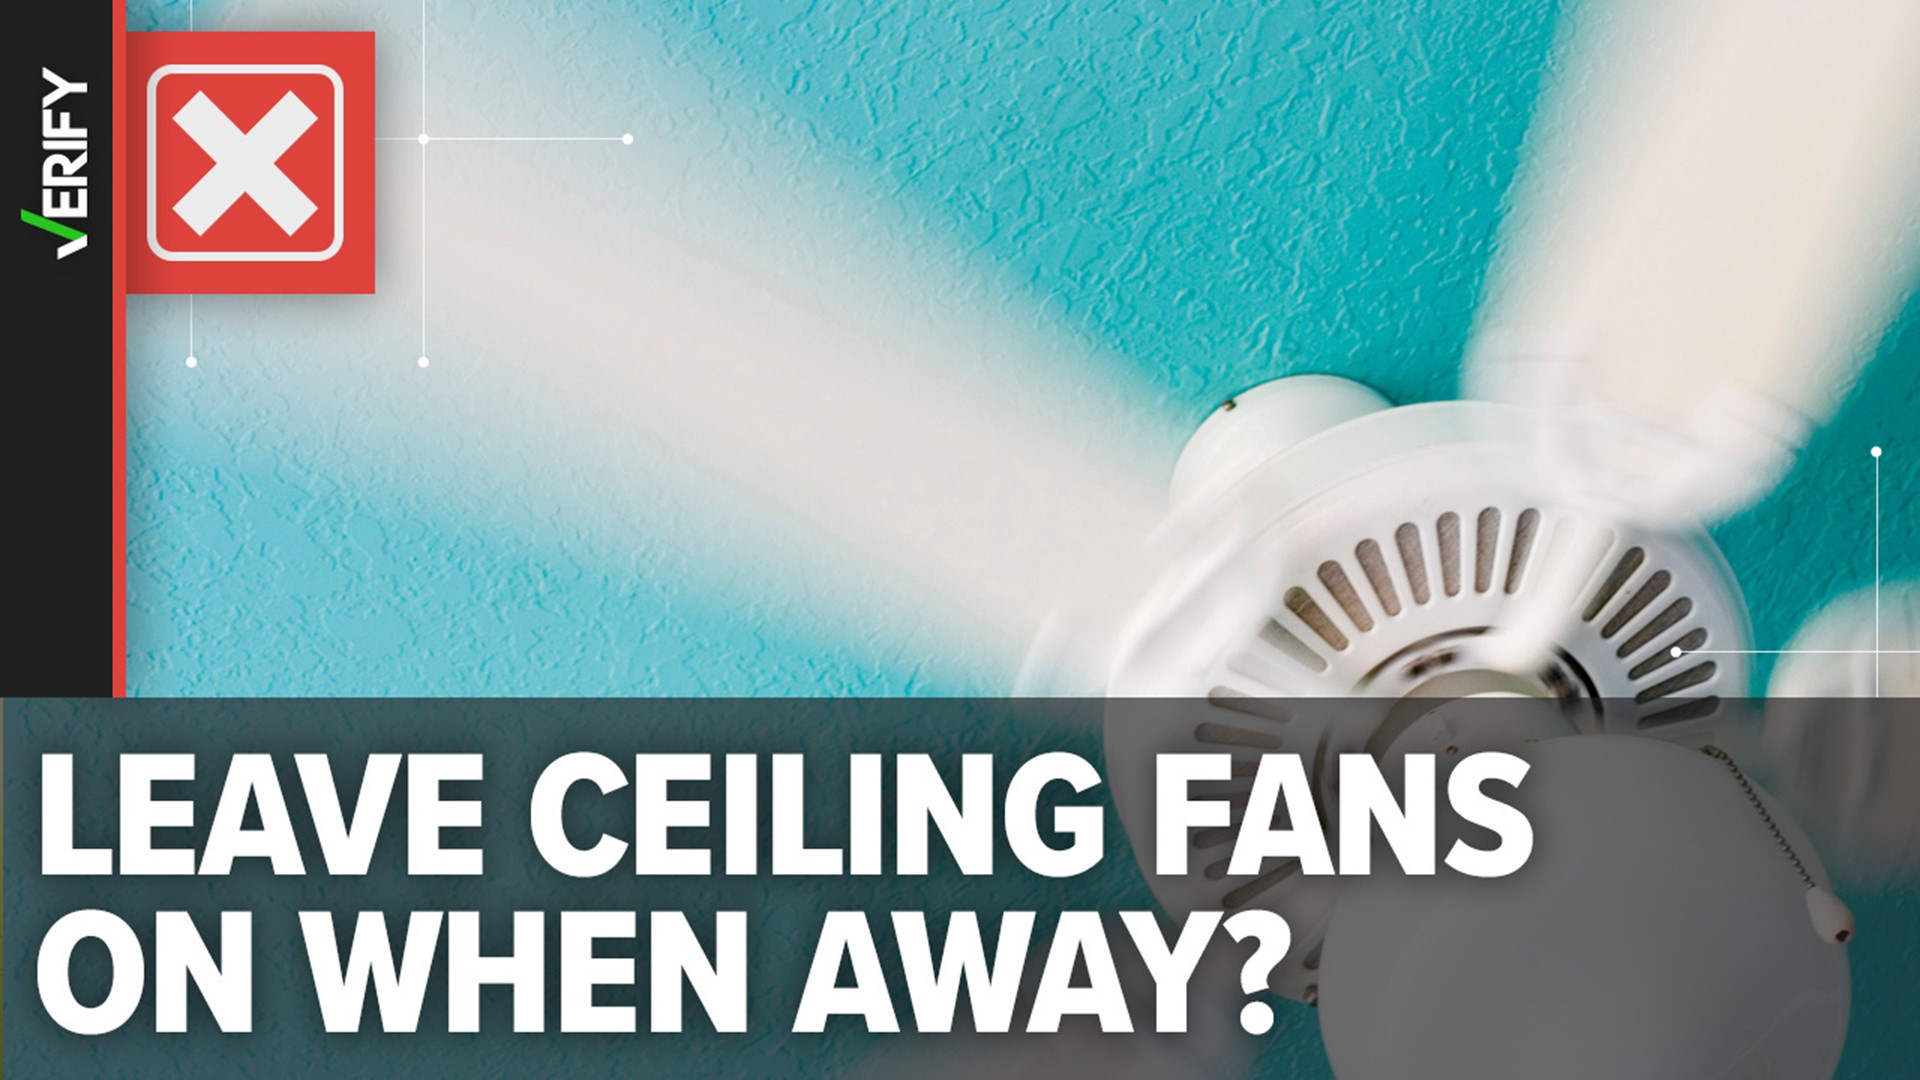 Ceiling fans cool you, not the air. So if no person or pet is home, leaving a fan on won’t make any difference.